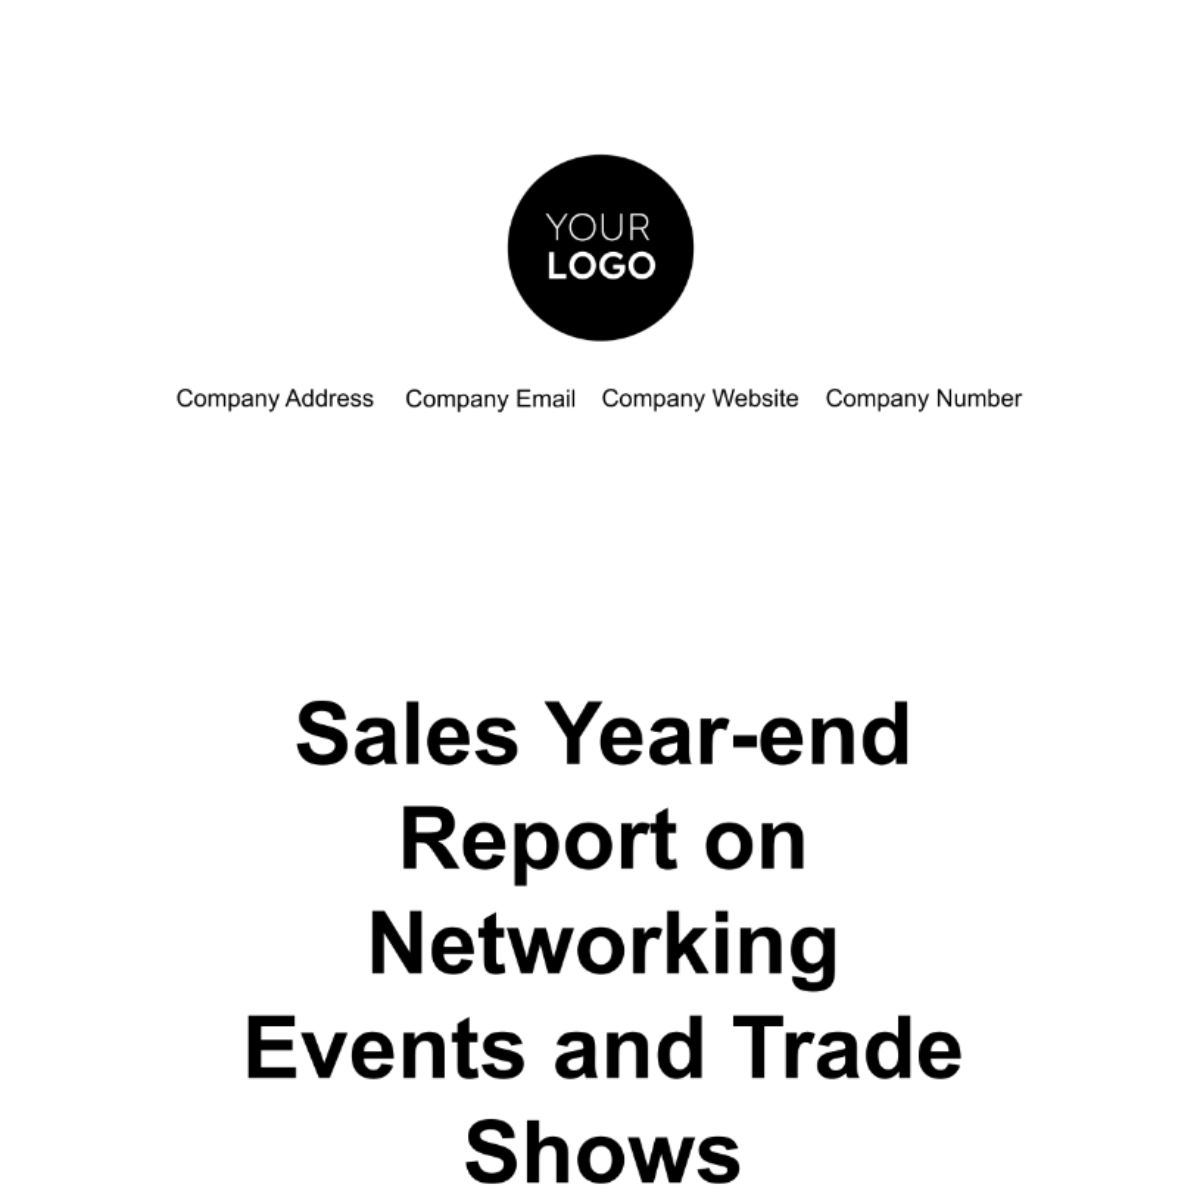 Free Sales Year-end Report on Networking Events and Trade Shows Template